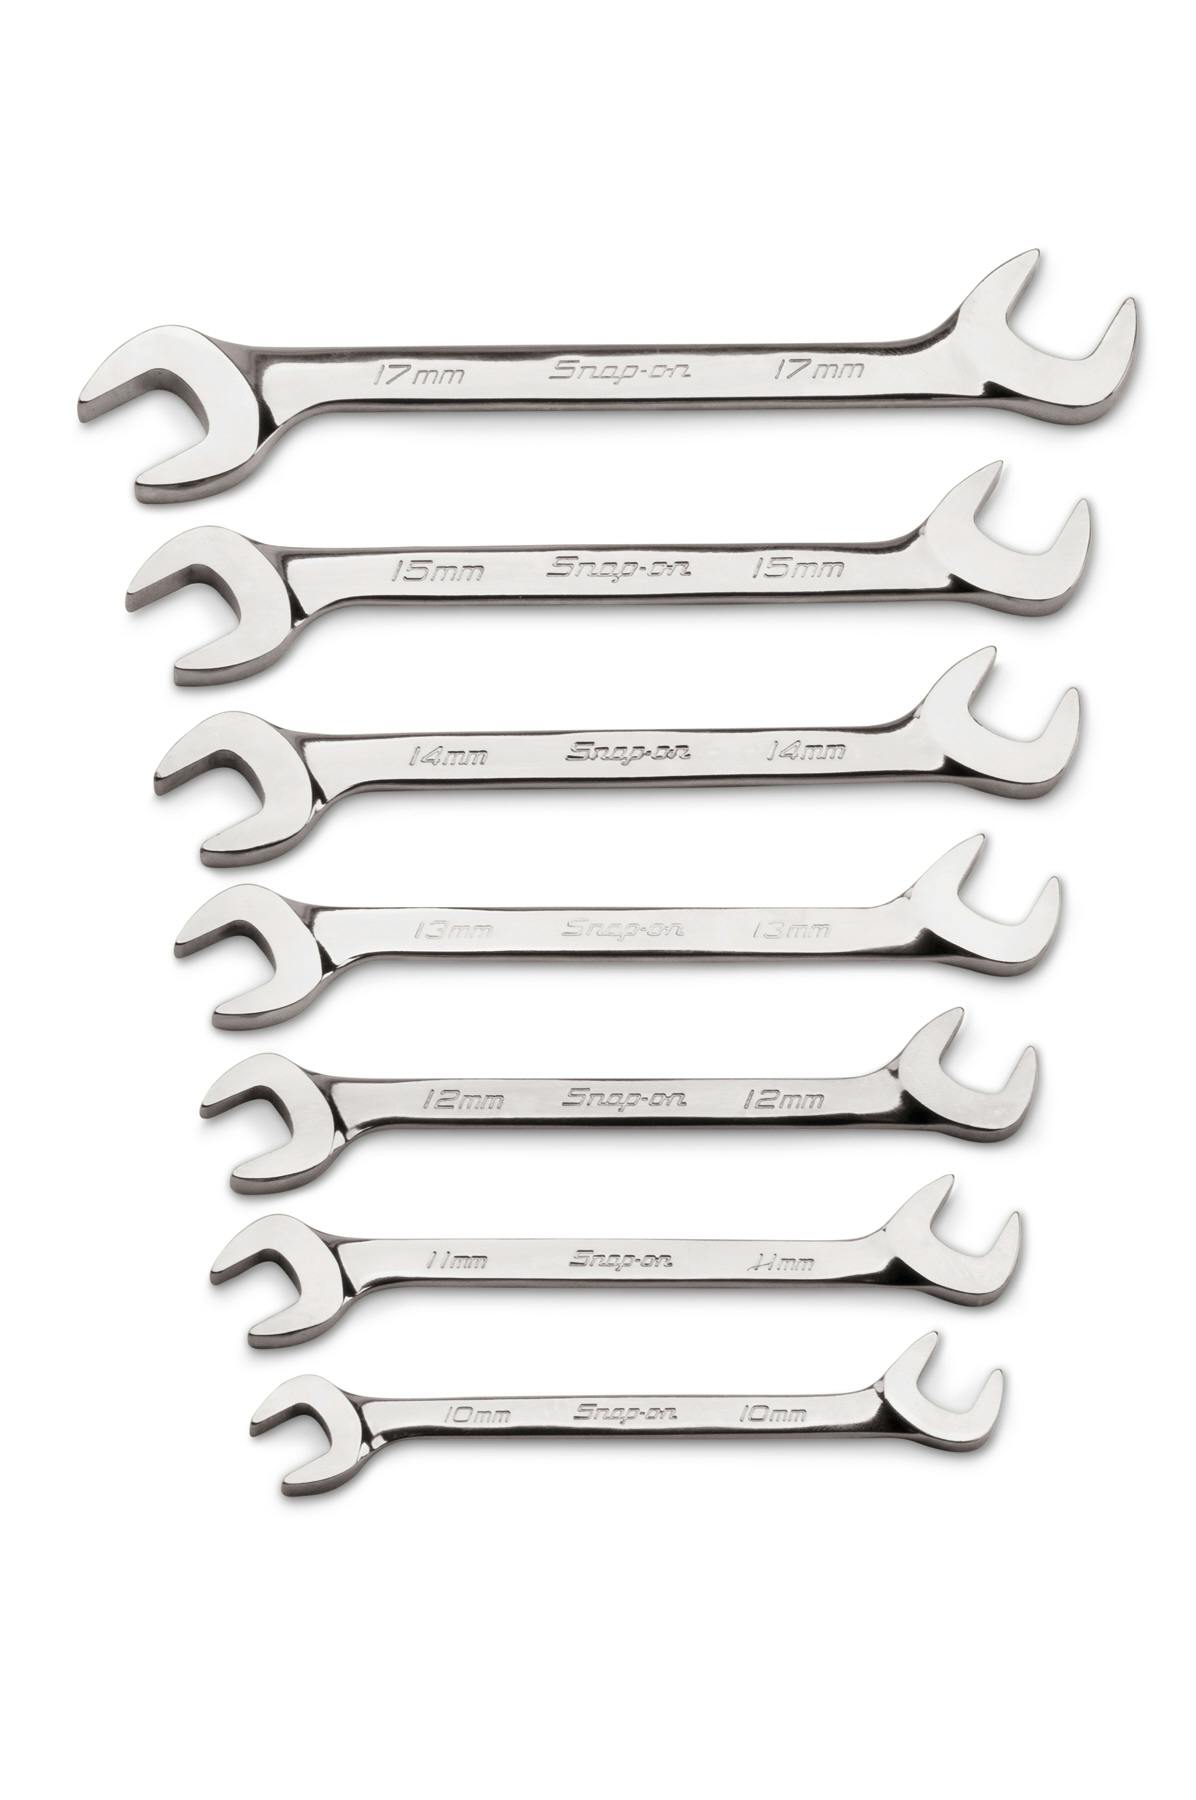 7 pc Metric 30°/60° Four-Way Angle Open-End Wrench Set (10-15 and 17 mm)